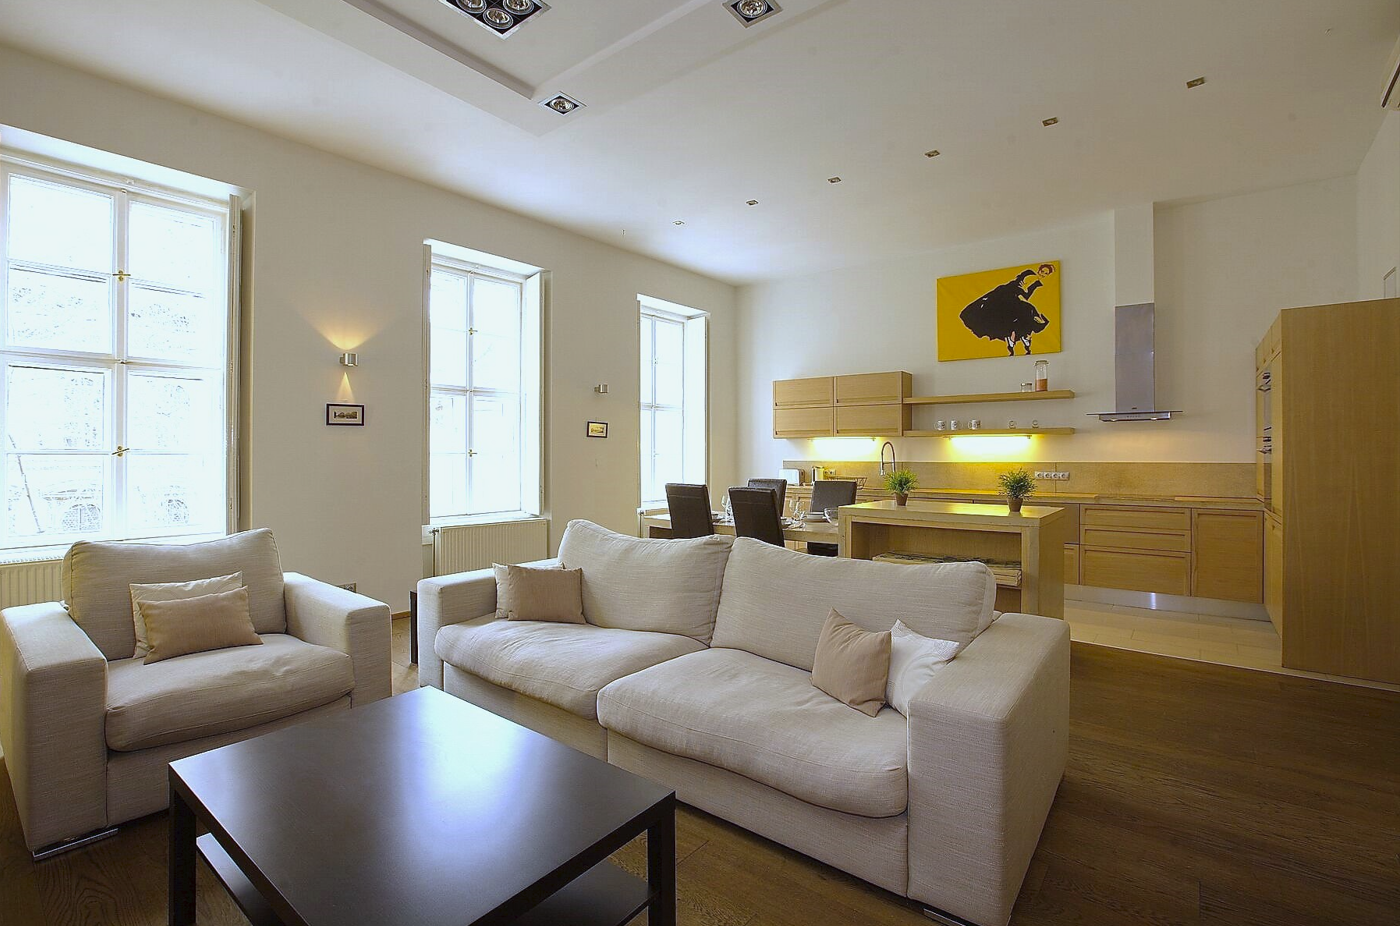 budapestrental-2-bedroom-apartment-for-rent-long-term-lease-district-6-flat-for-rent9